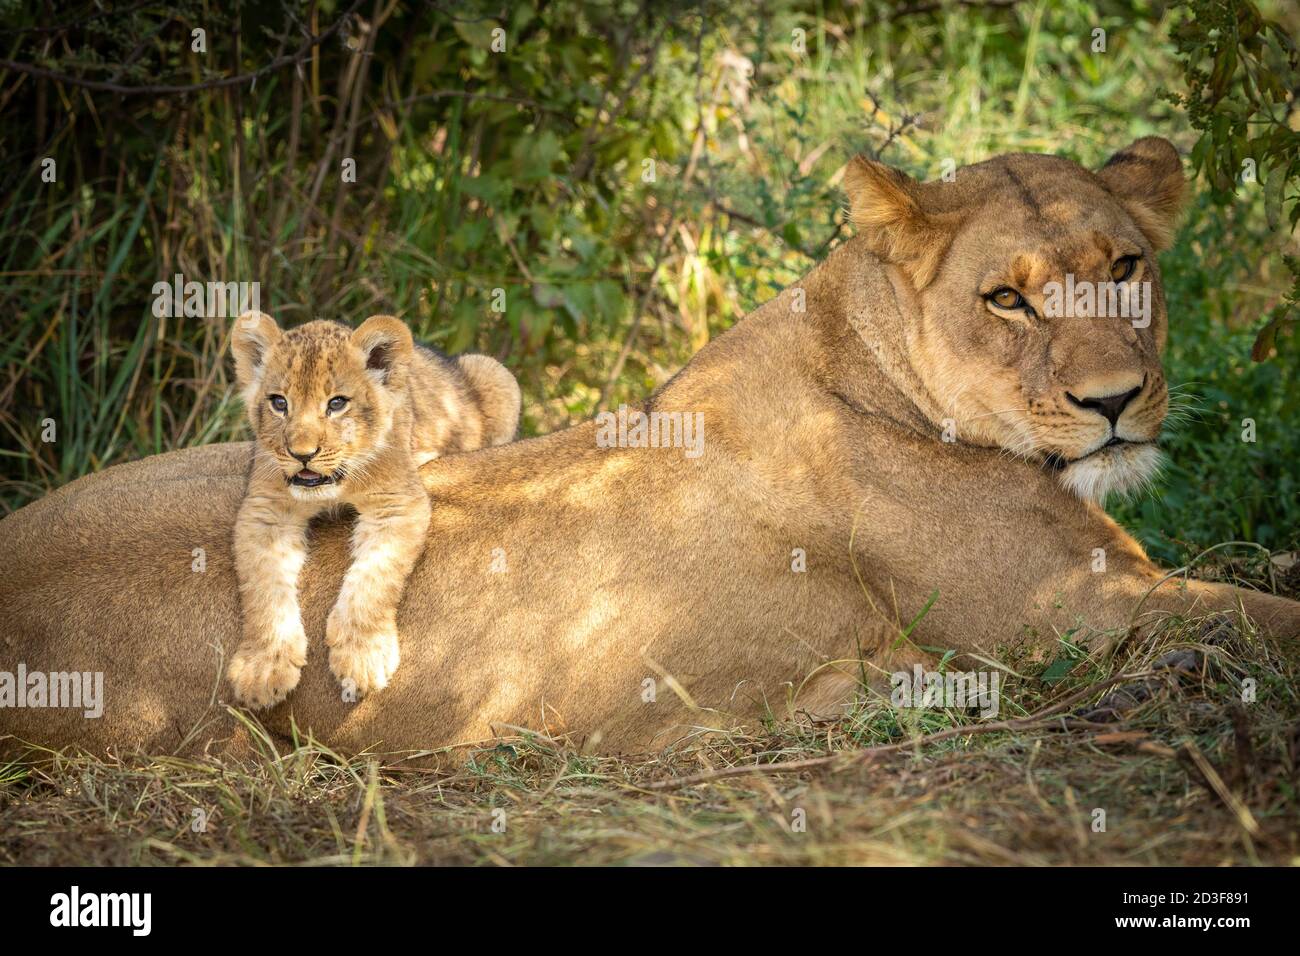 Cute baby lion lying on its mother in Savuti in Botswana Stock Photo